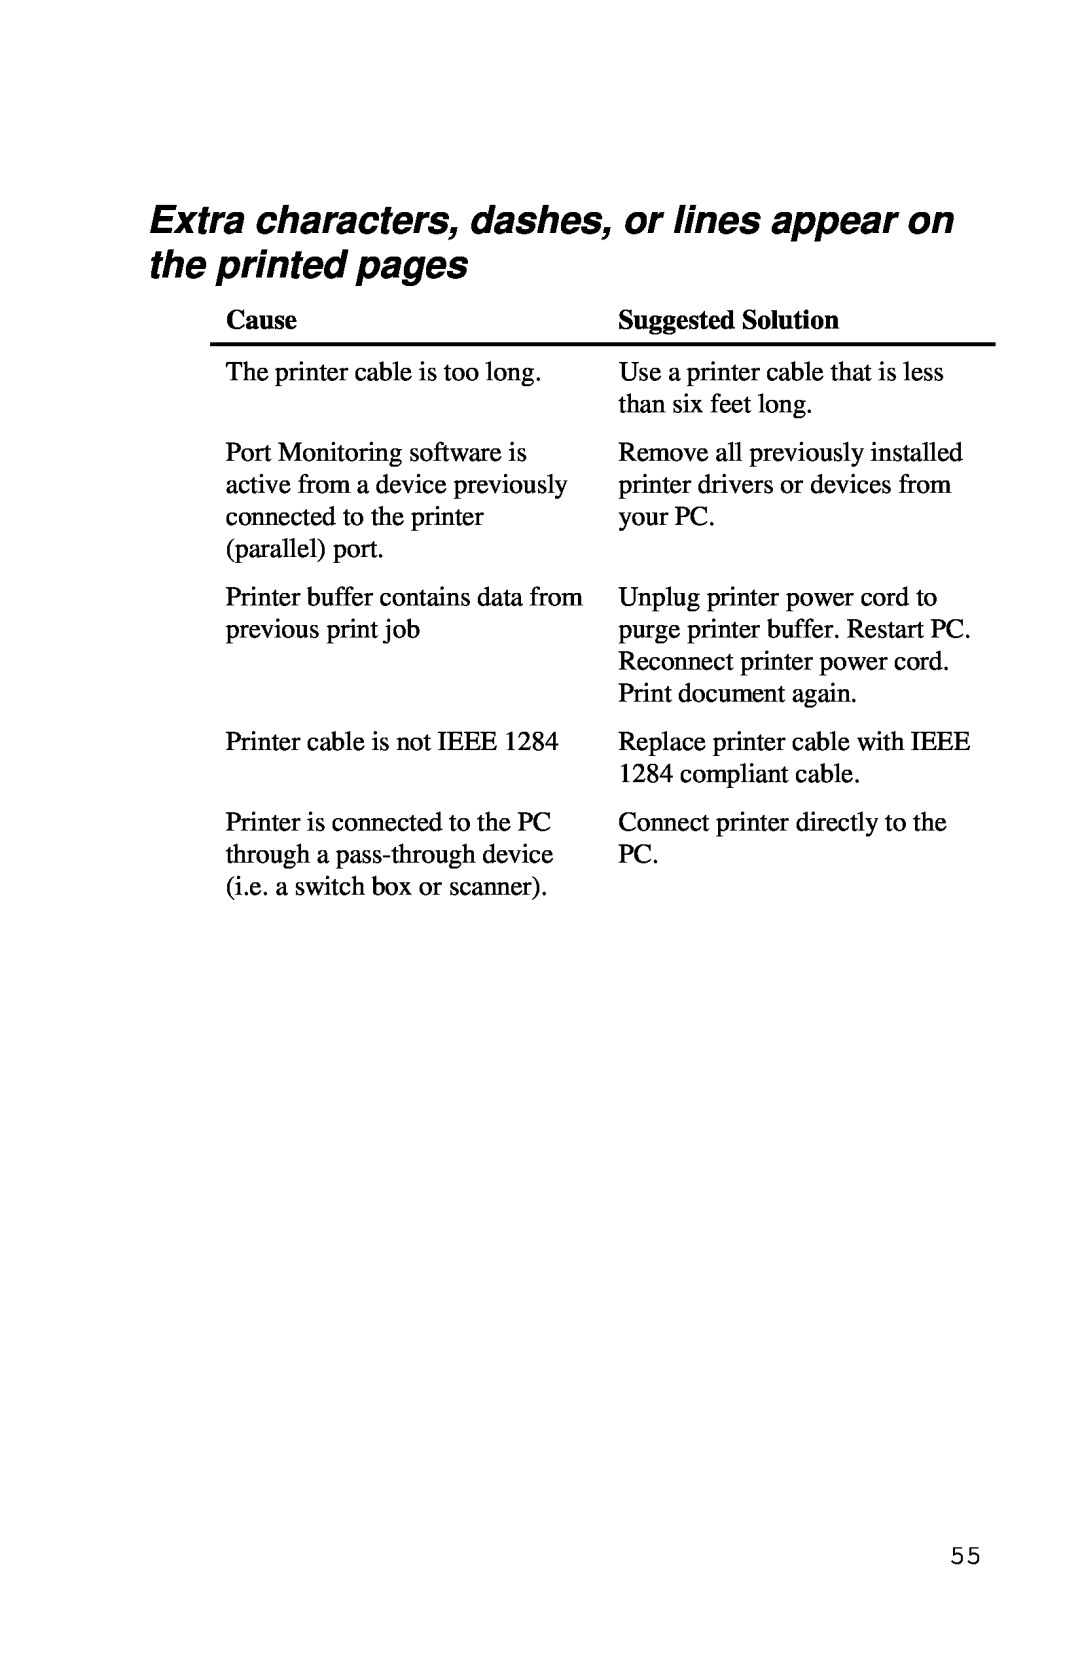 Xerox Inkjet Printer manual Cause, Suggested Solution, The printer cable is too long 